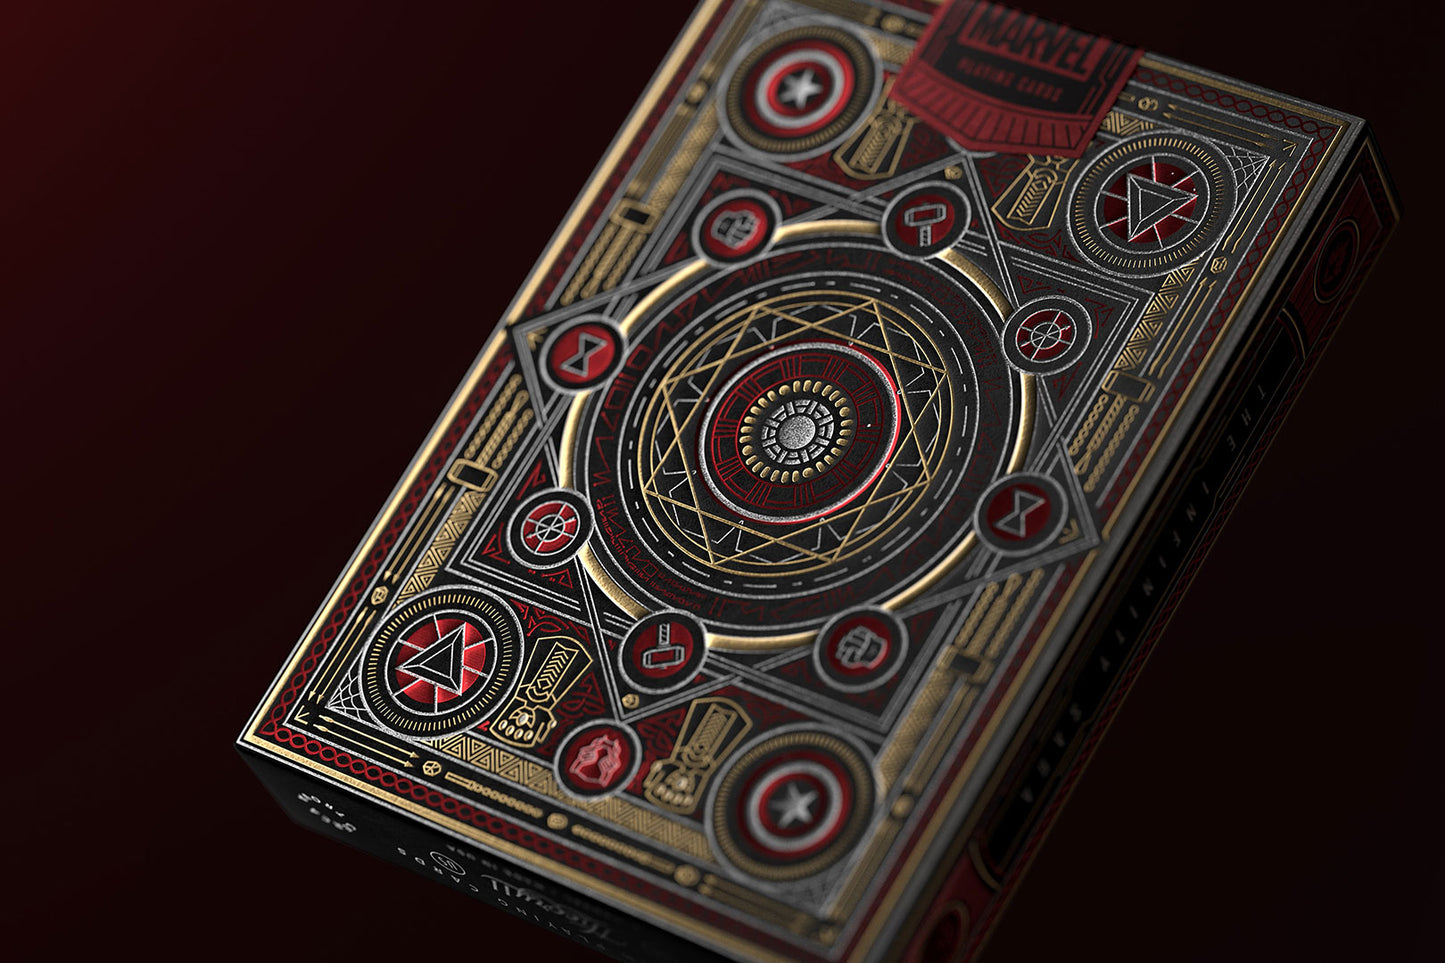 Avengers: Infinity Saga Playing Cards - Red